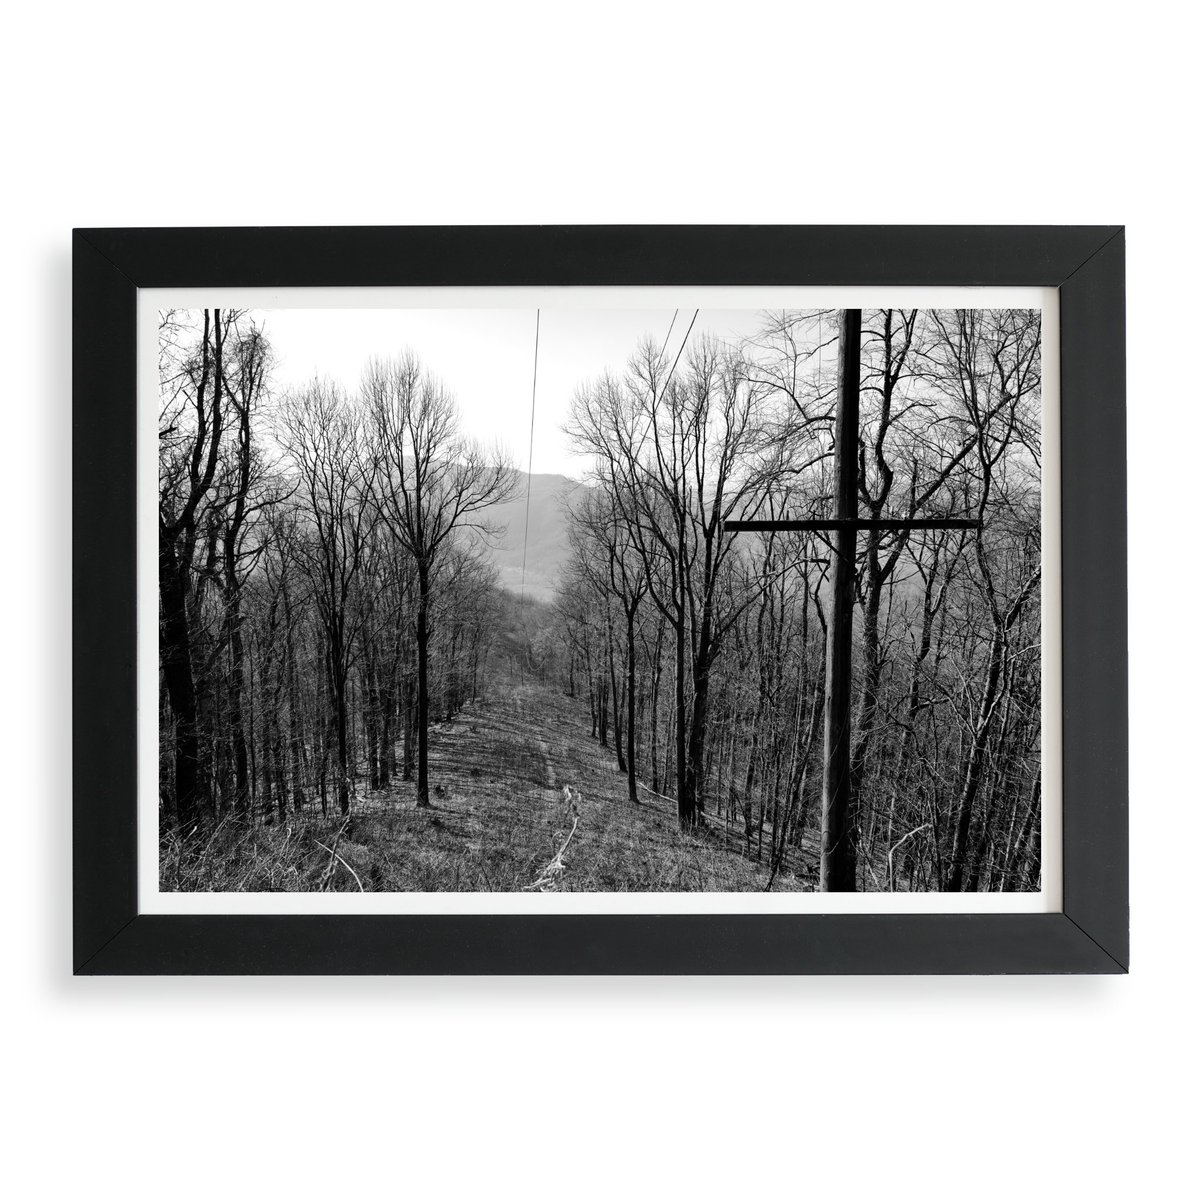 Due to a popular demand I’ve added a Rat Jaw print to my online store! …vid-miller-photography.sumupstore.com #bm100